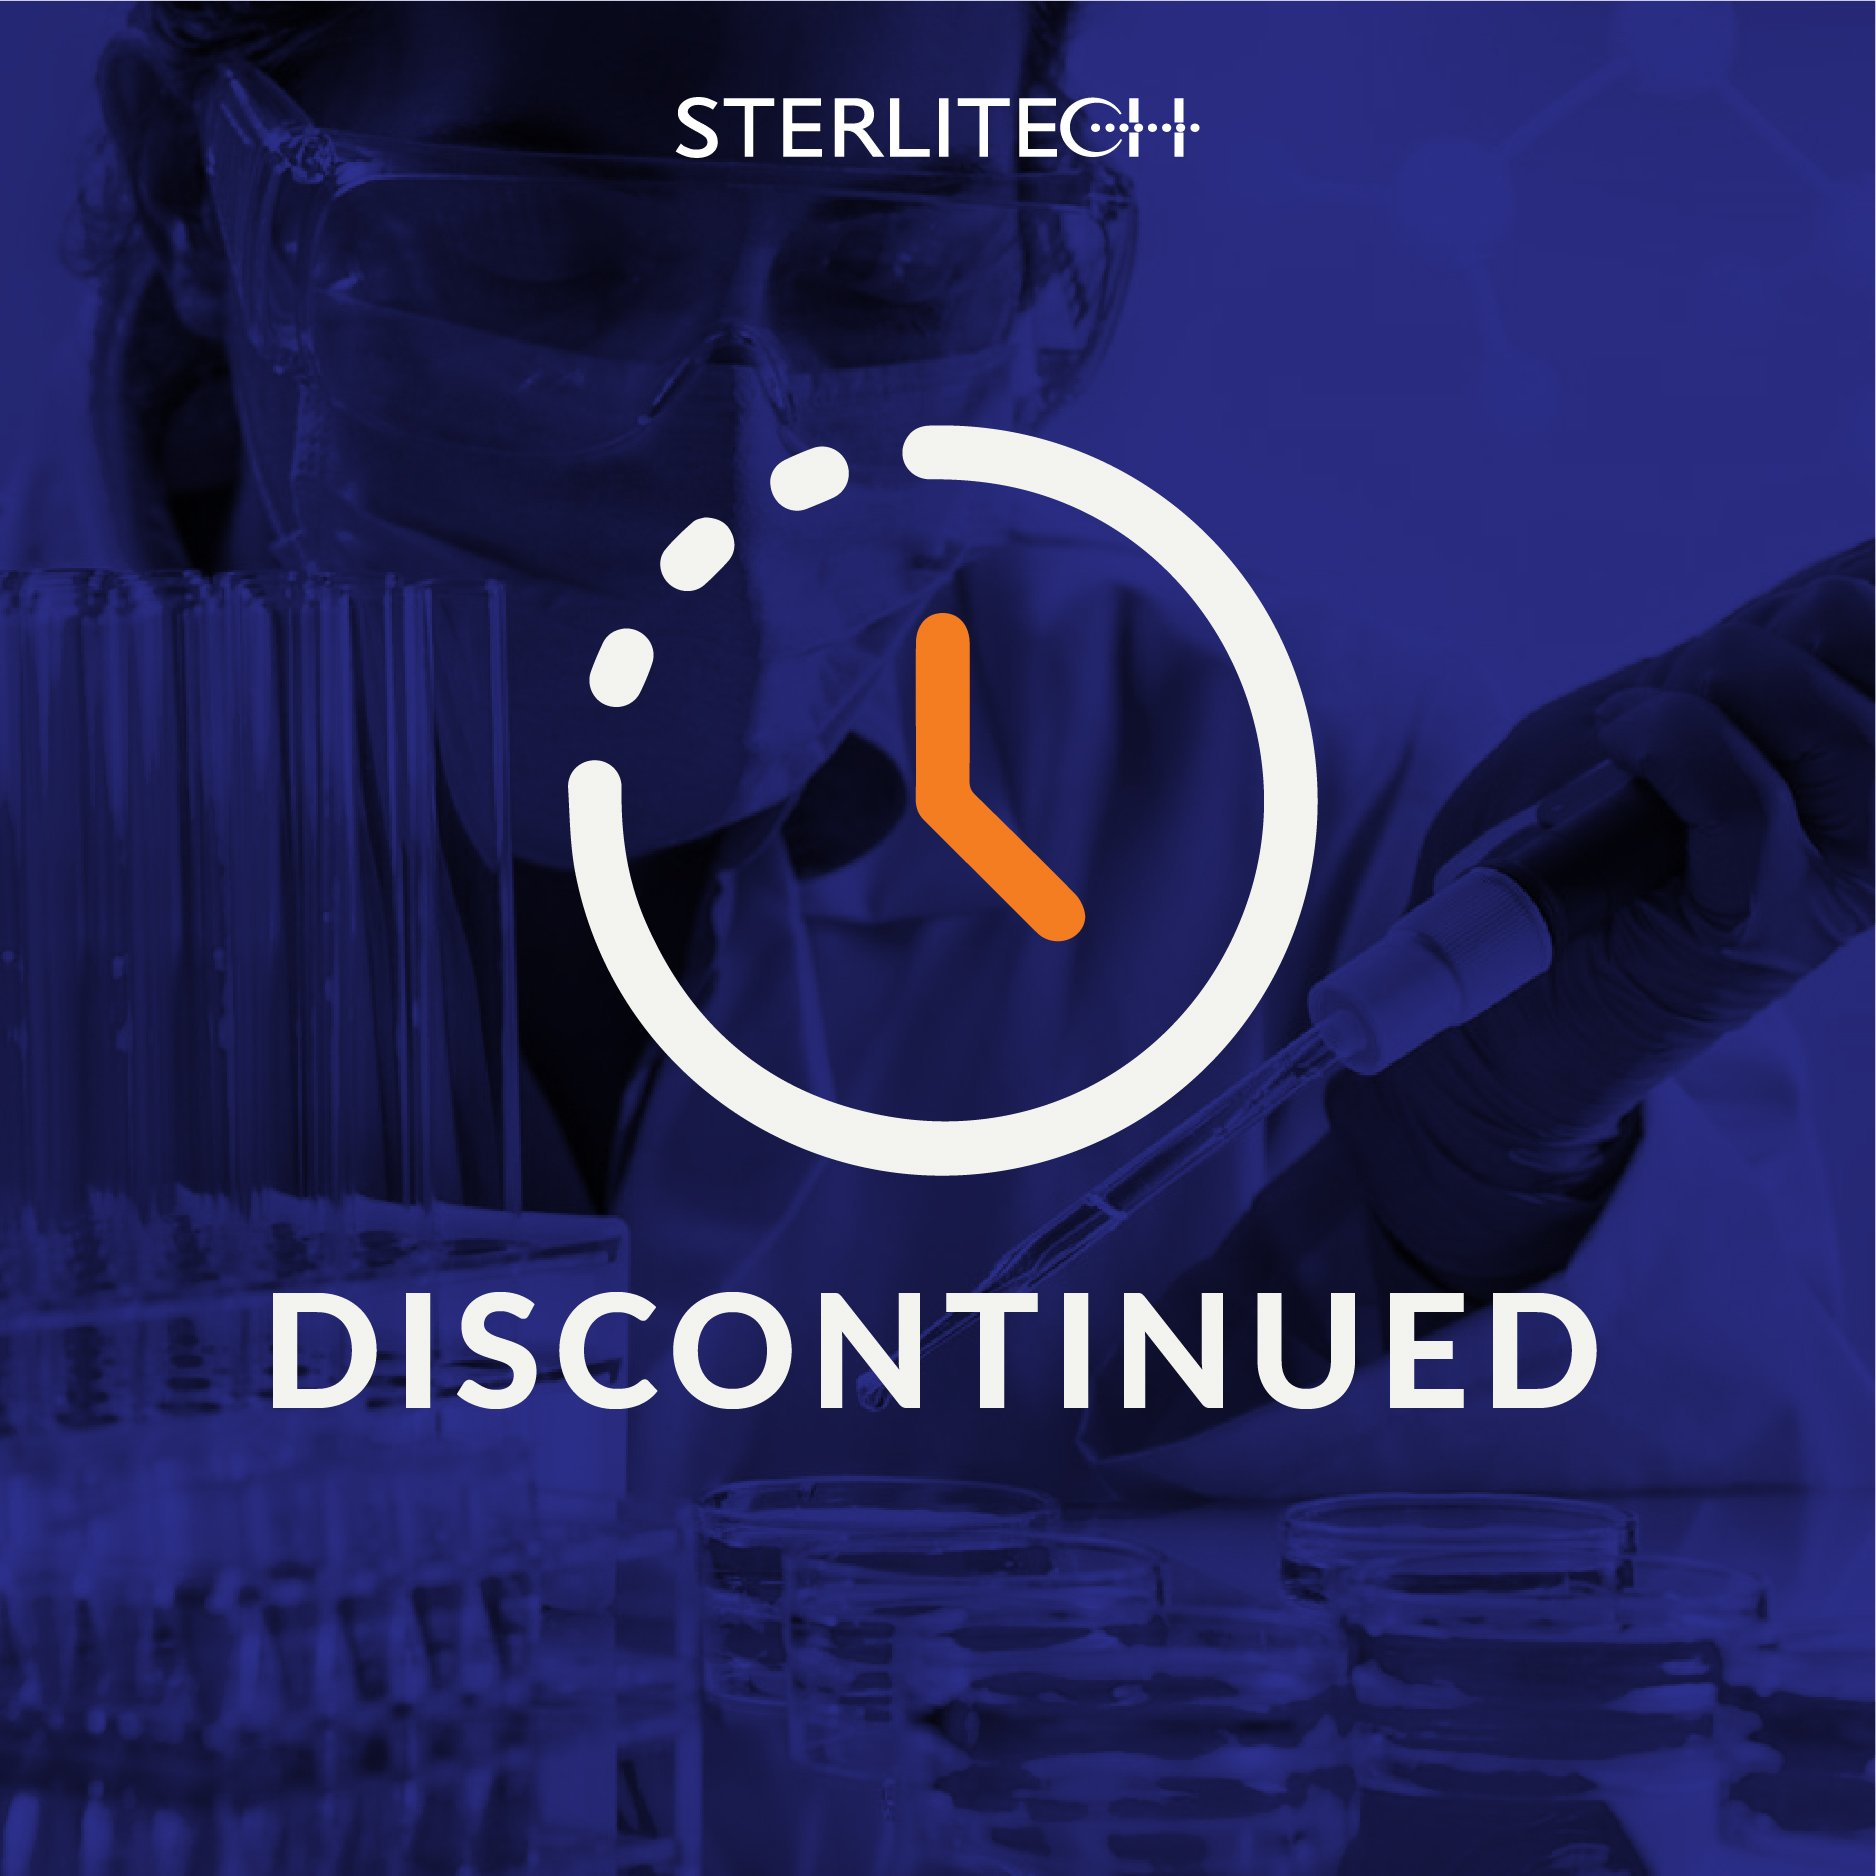 Product Discontinuation Notice: Advantec UHP Stirred Cells